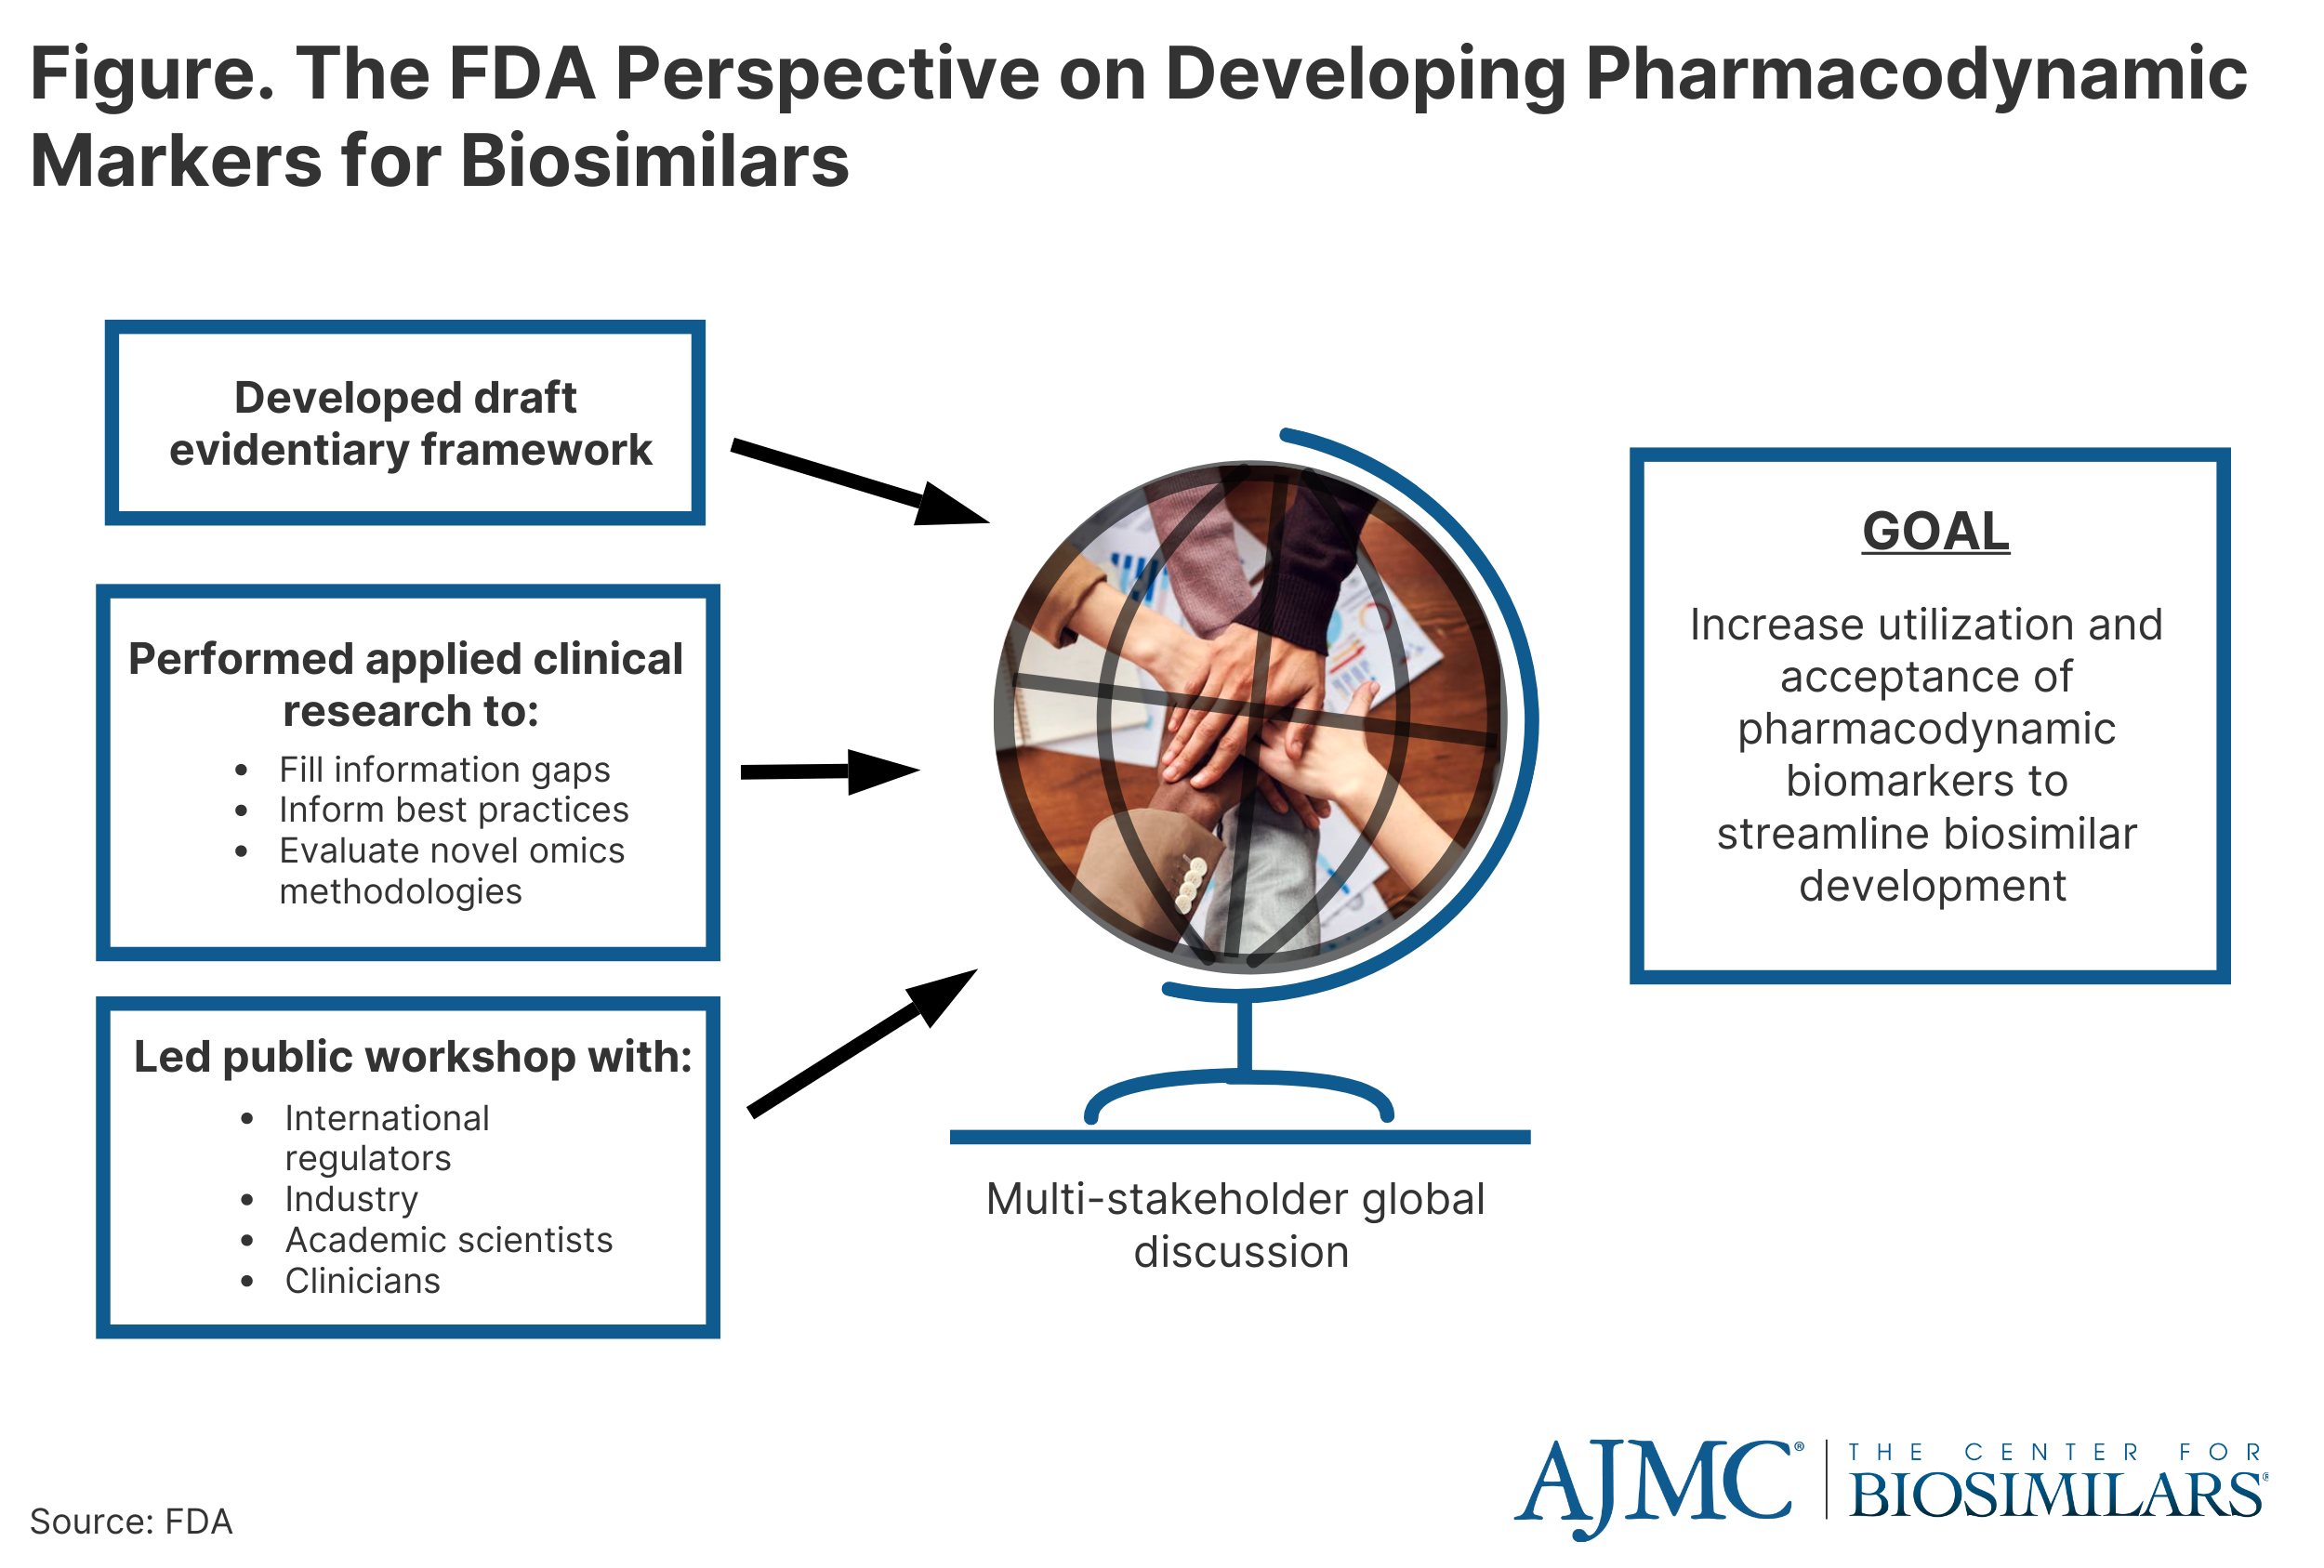 Figure 1. The FDA perspective on developing pharmacodynamic markers for biosimilars. [Source: FDA]